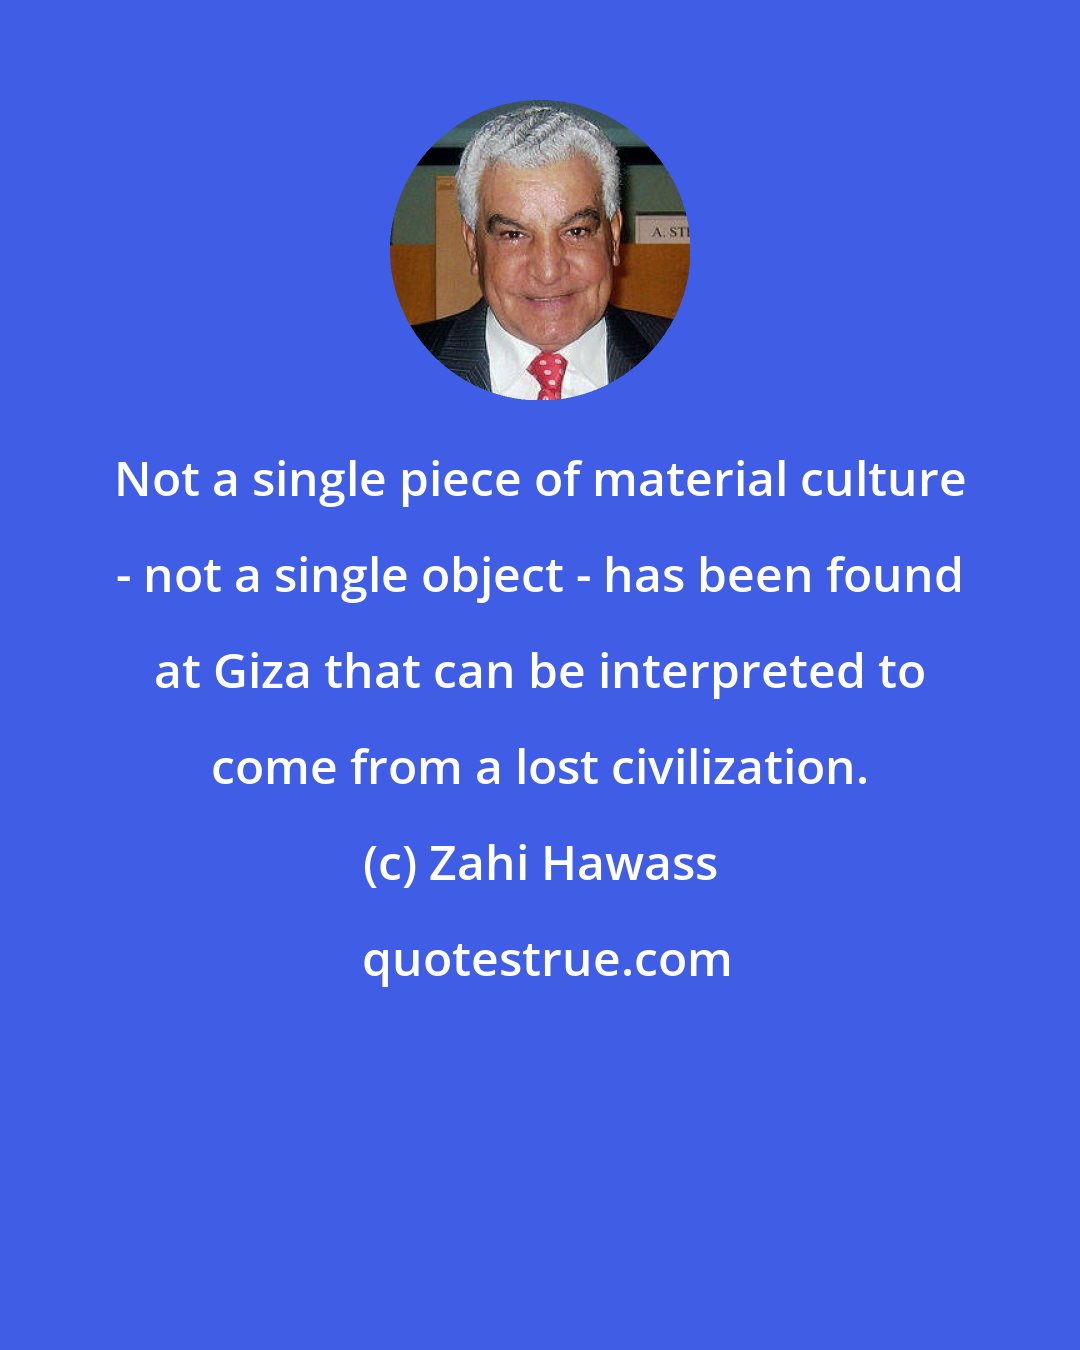 Zahi Hawass: Not a single piece of material culture - not a single object - has been found at Giza that can be interpreted to come from a lost civilization.